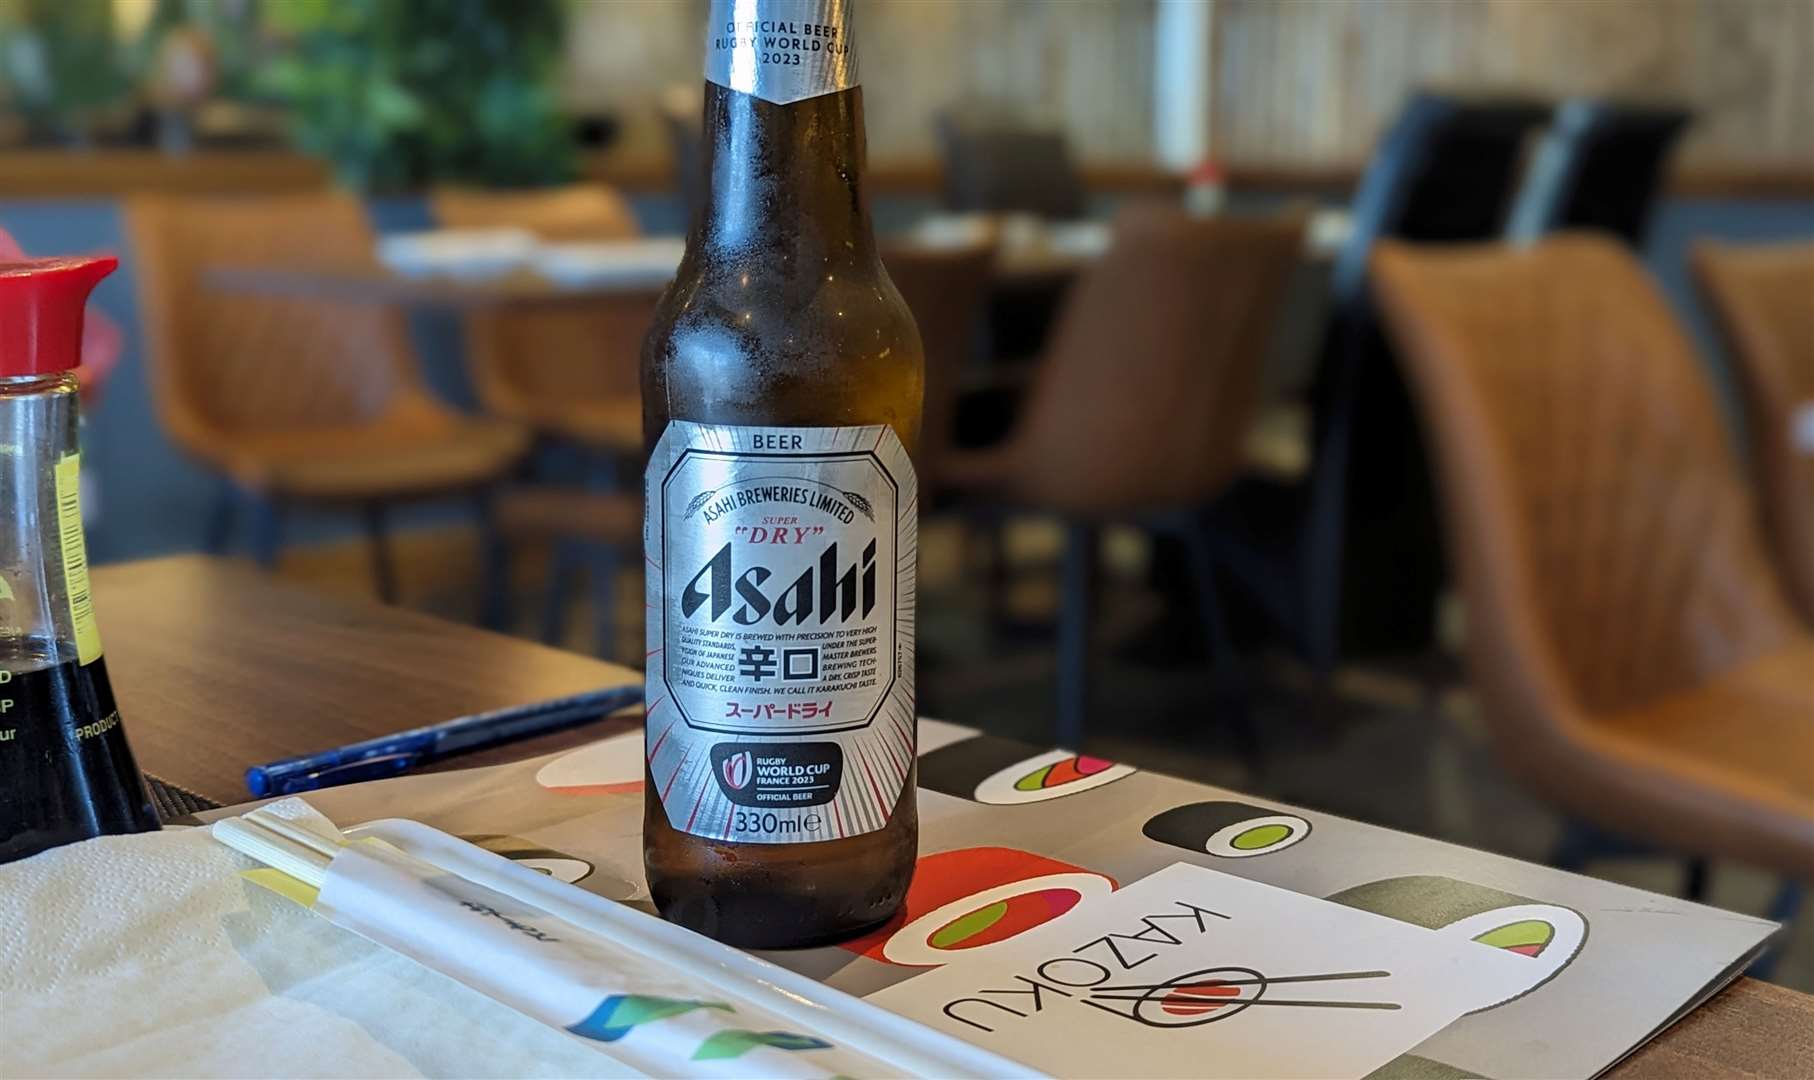 Cold bottles of Asahi were the order of the day